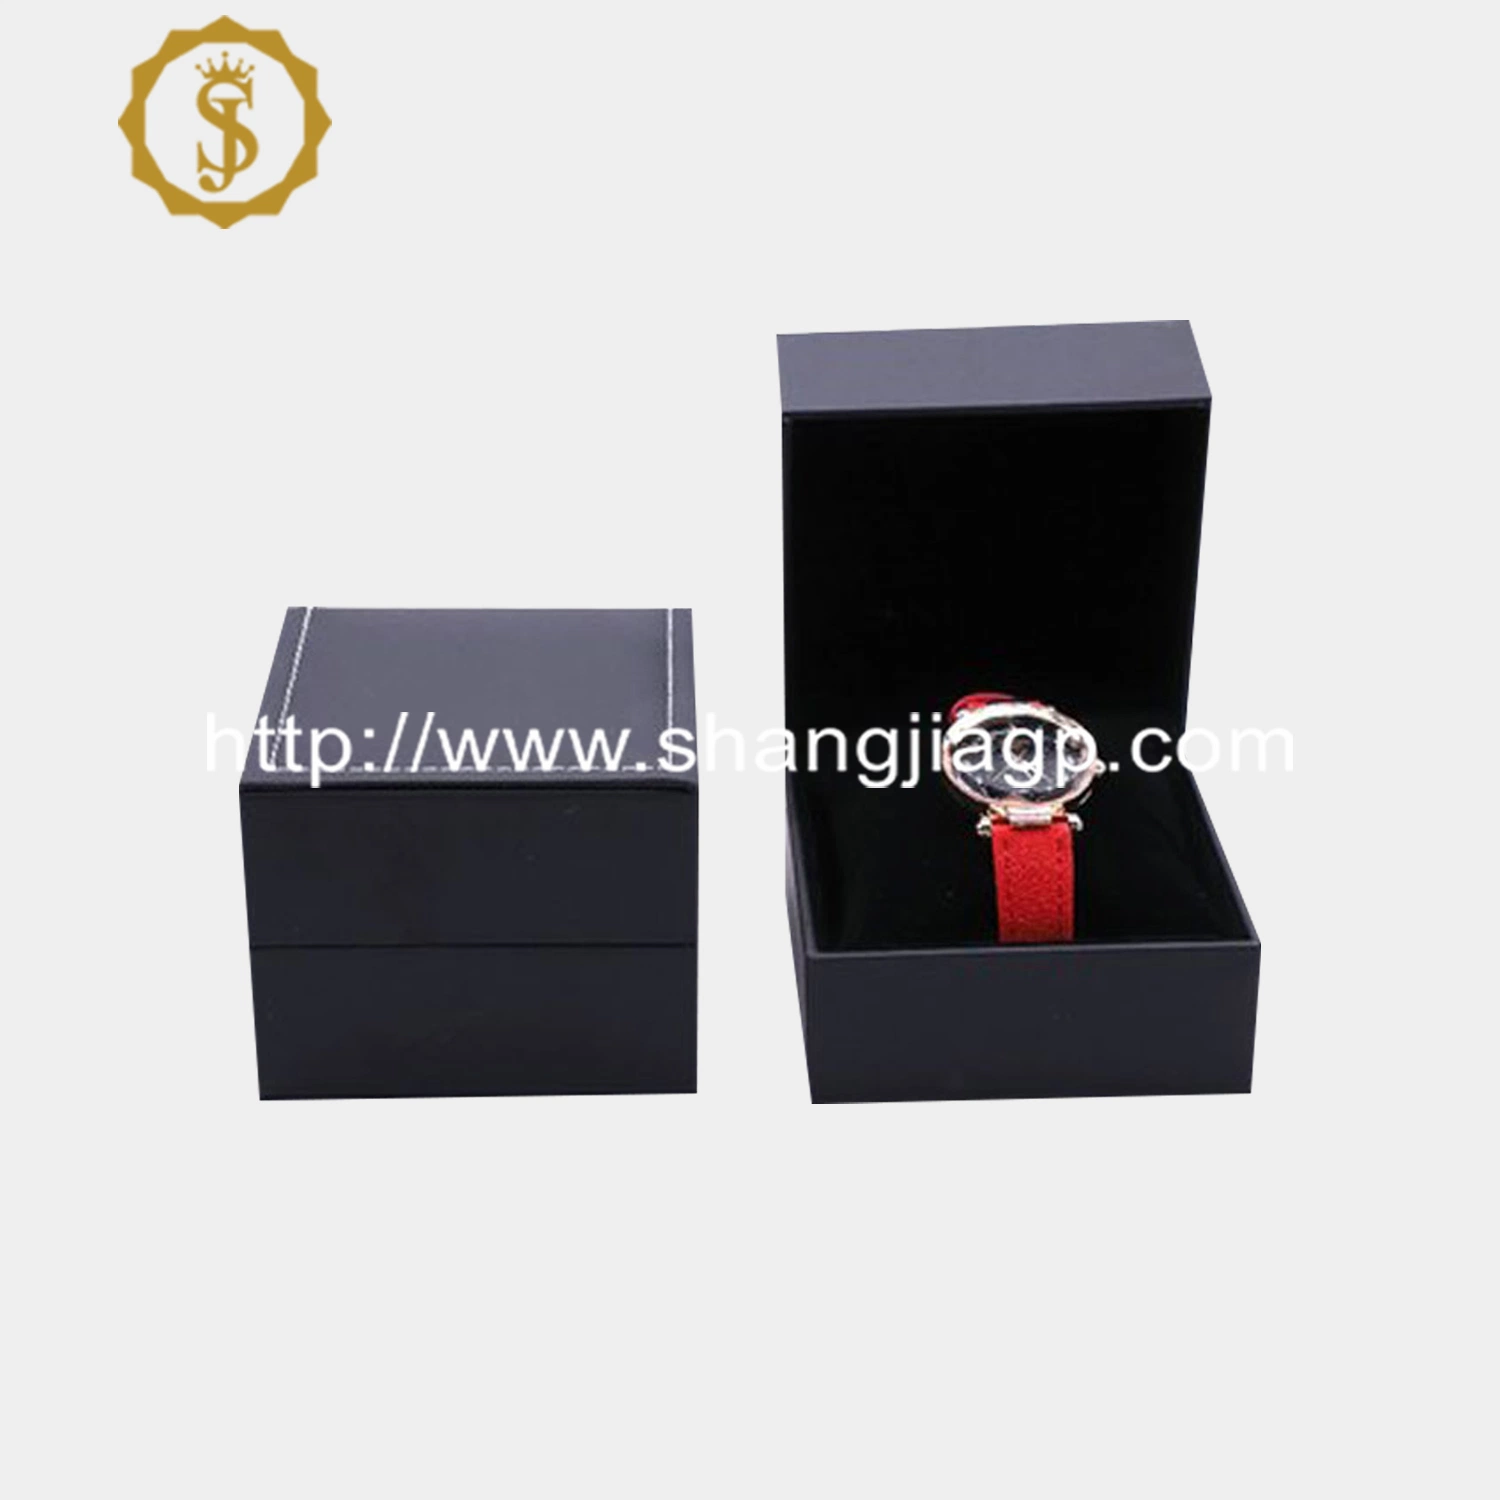 Luxury Watch and Ring Packaging Box Black Logo PU Leather High Quality Single Luxury Watch Case Box with 'cusion